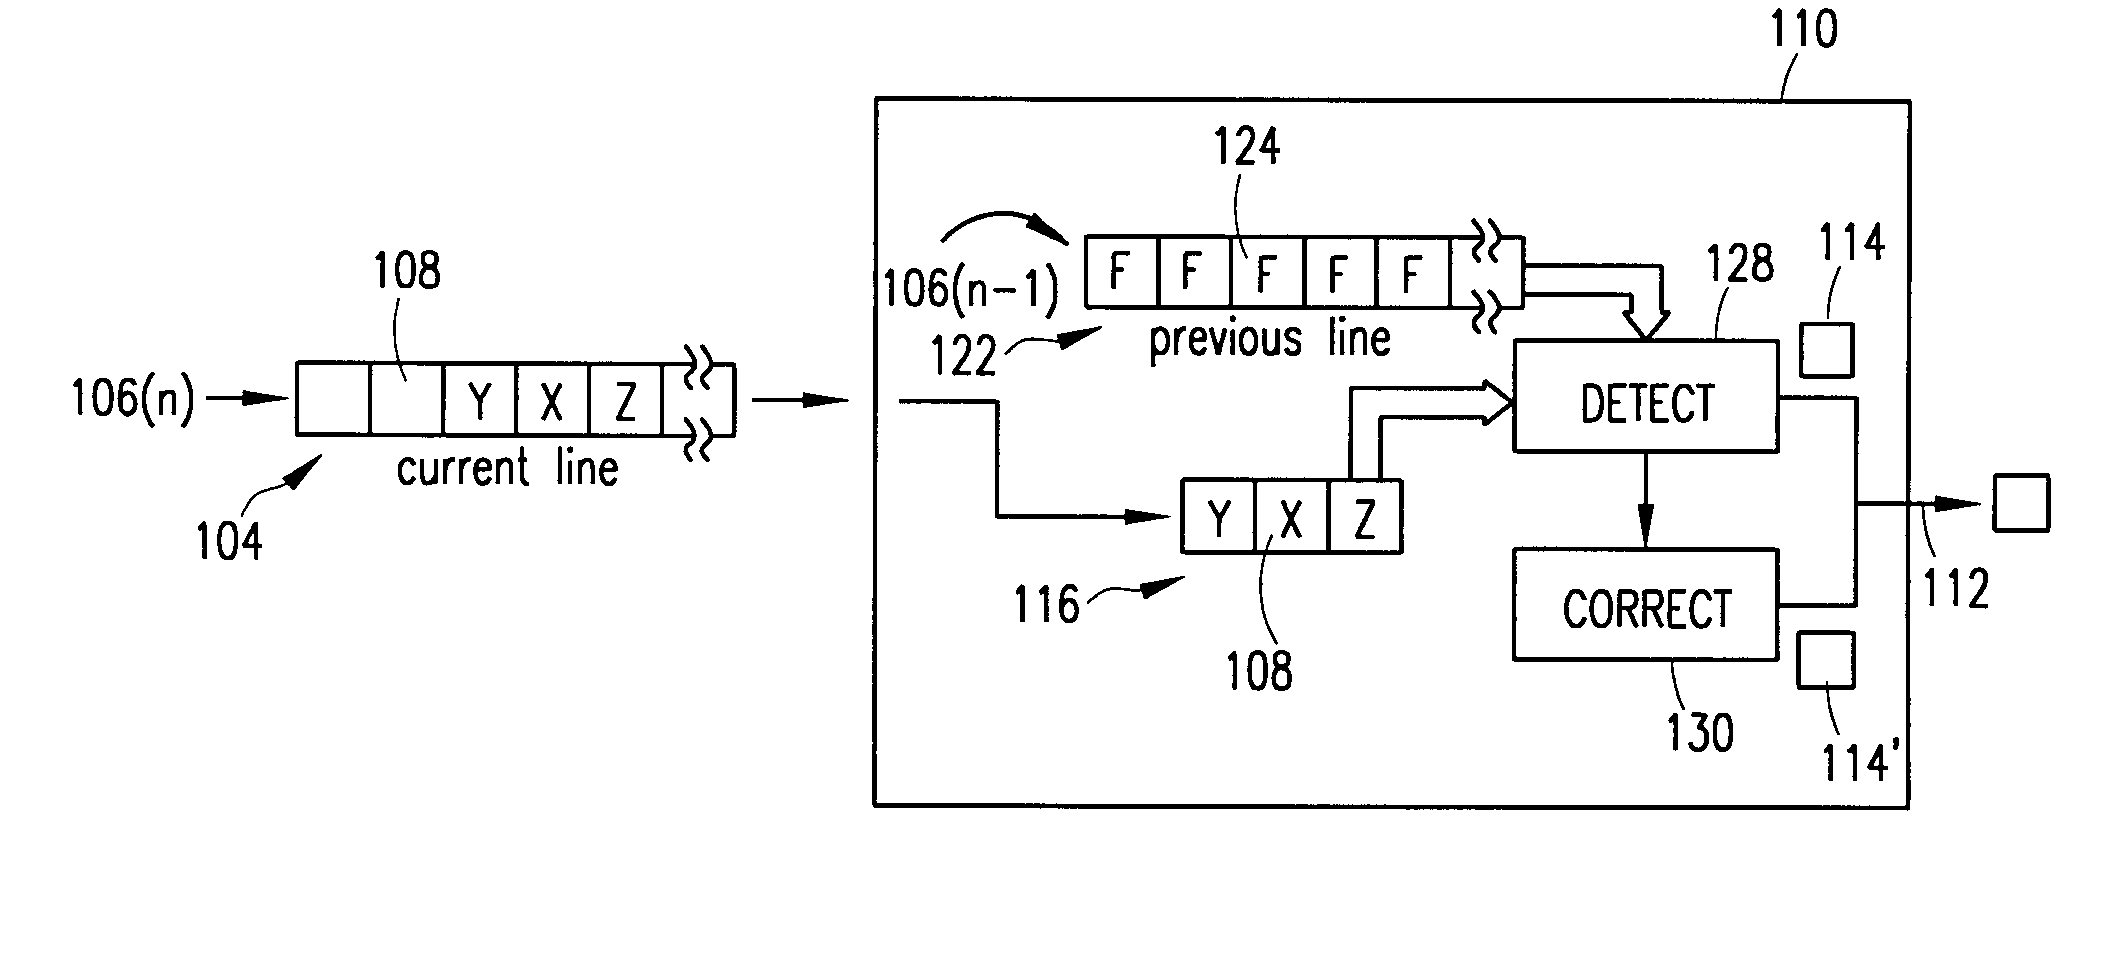 Bad pixel detection and correction in an image sensing device